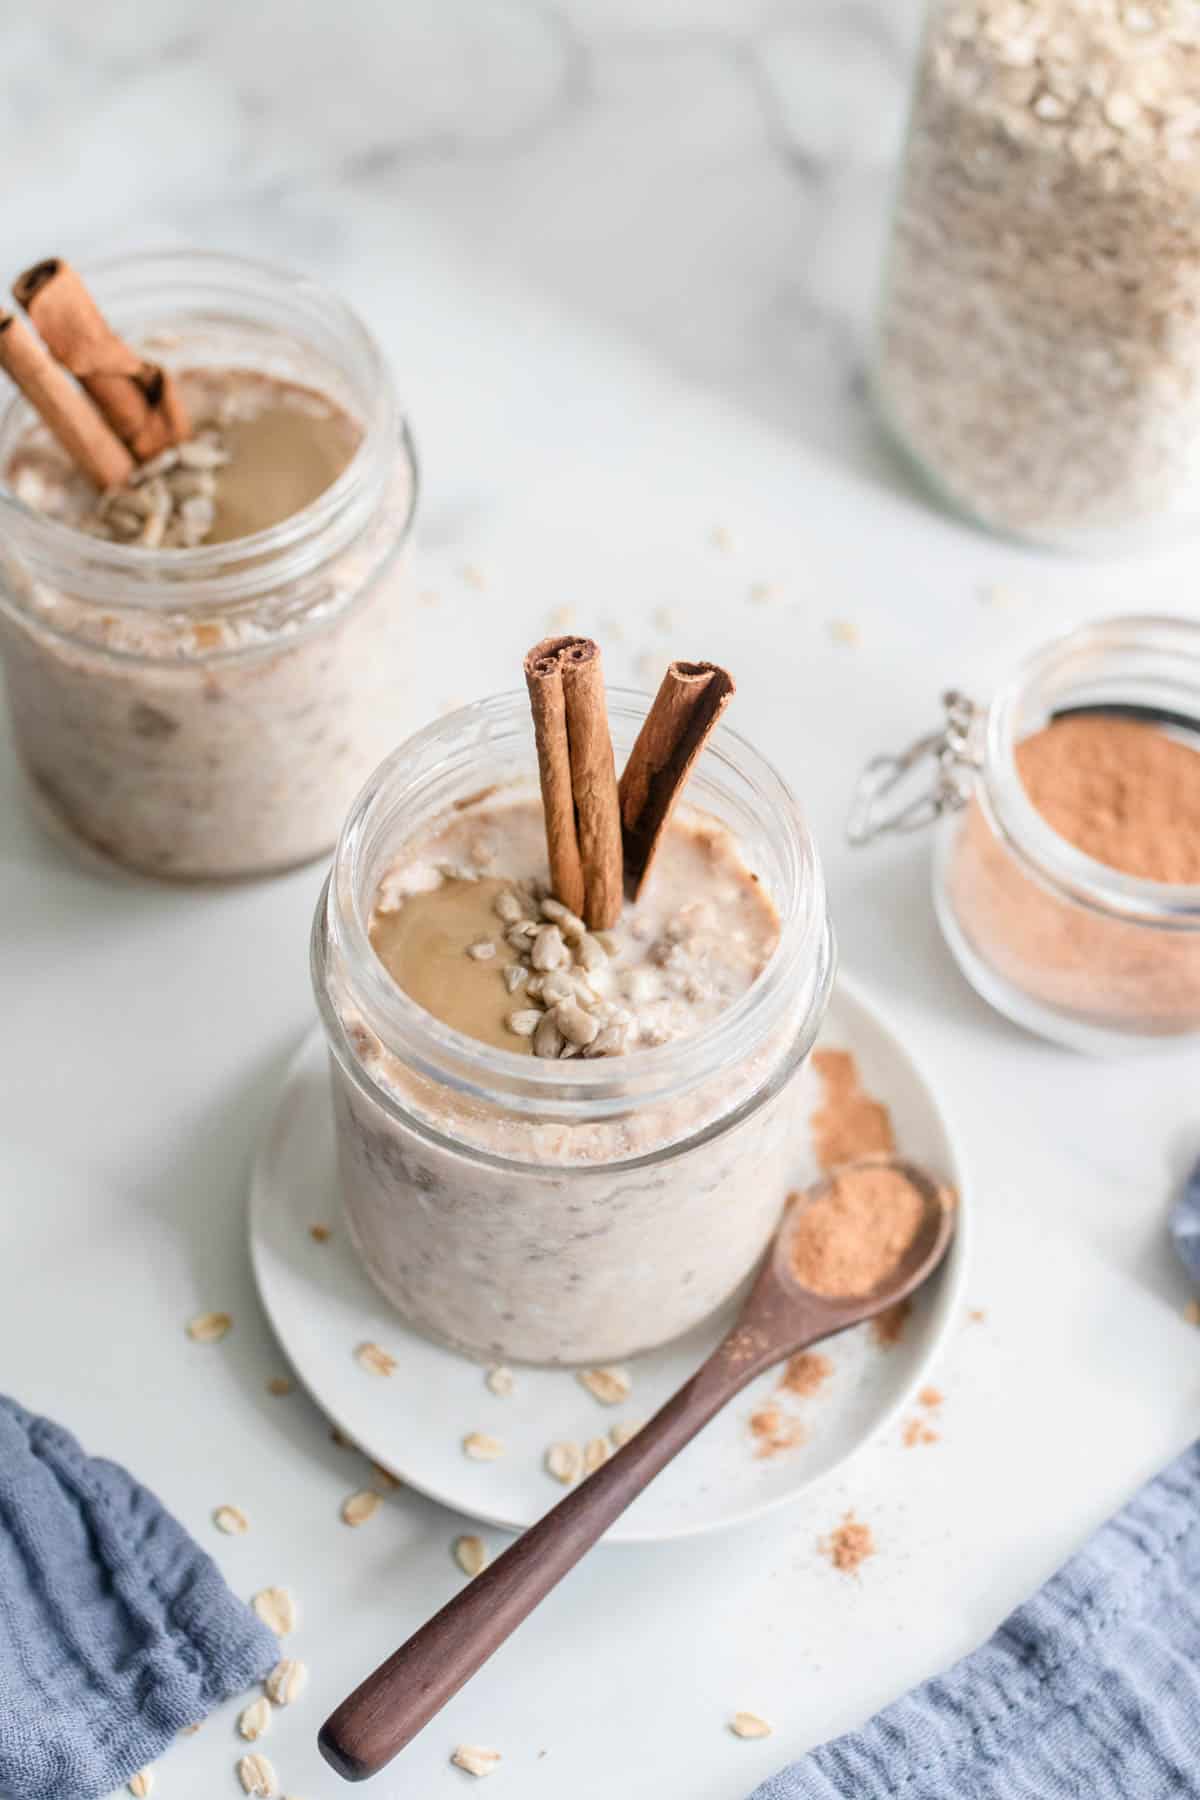 Two jars of overnight oats with cinnamon sticks.